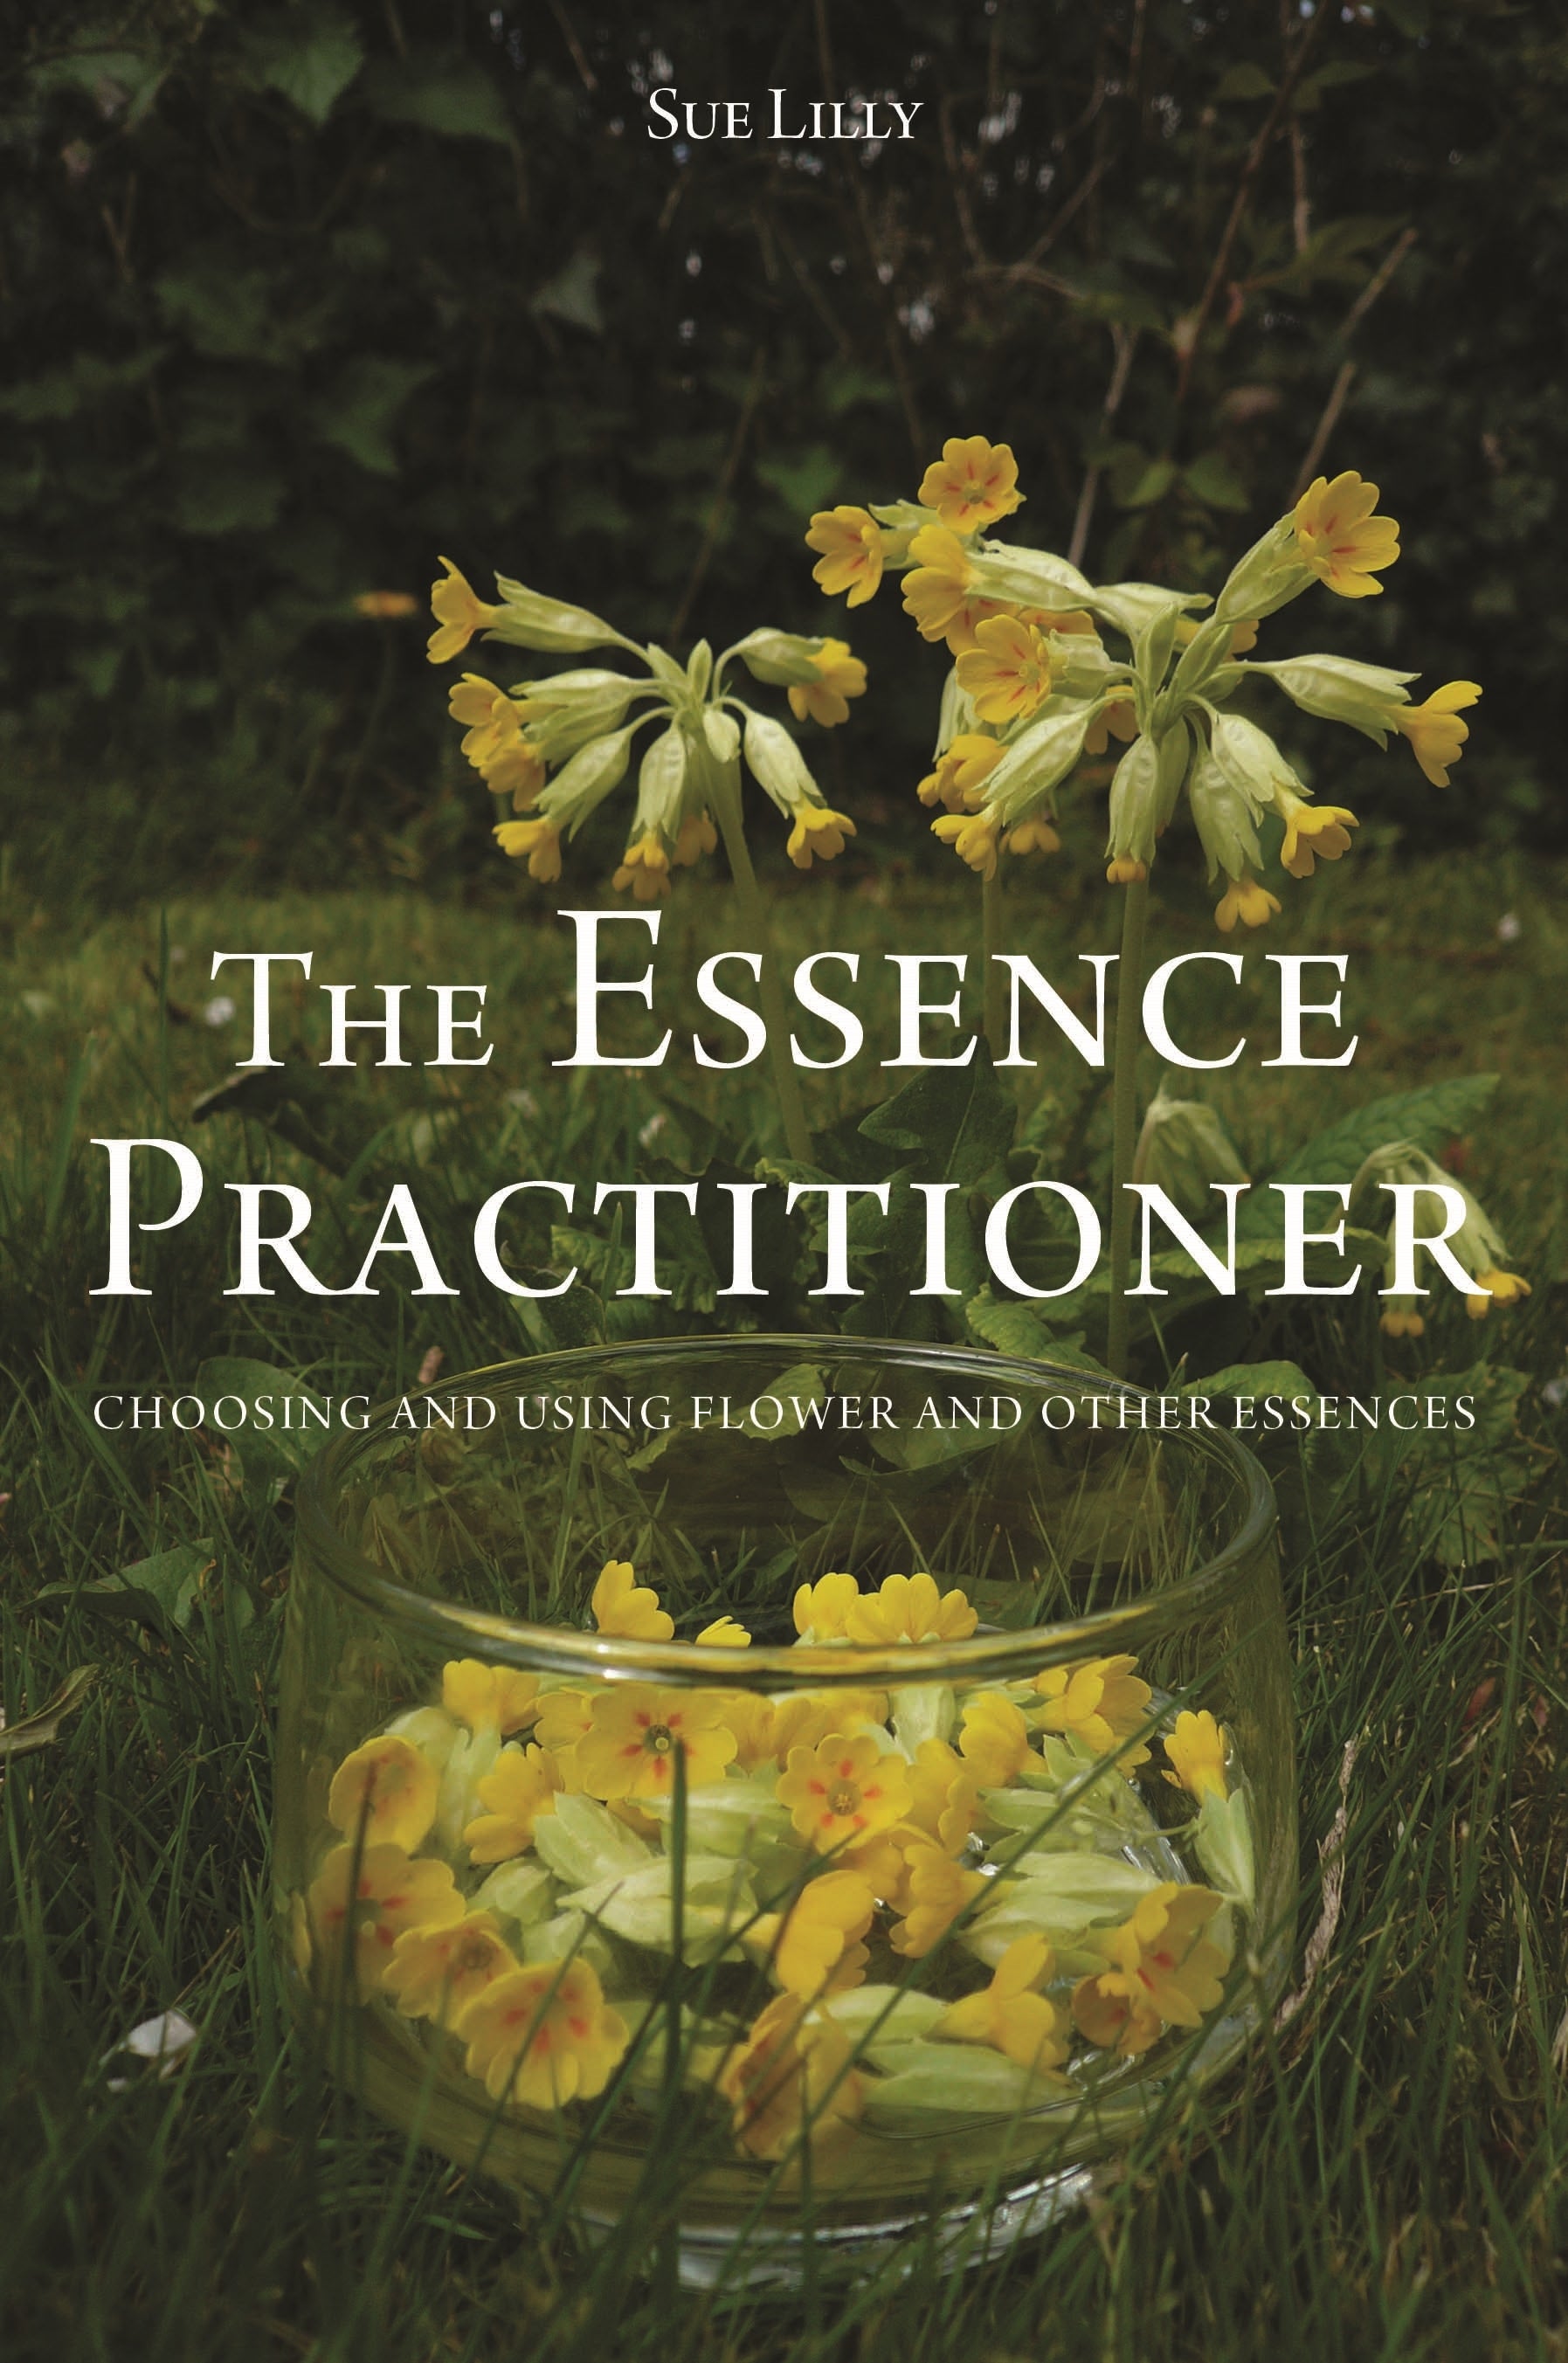 The Essence Practitioner by Tony Pinkus, Sue Lilly